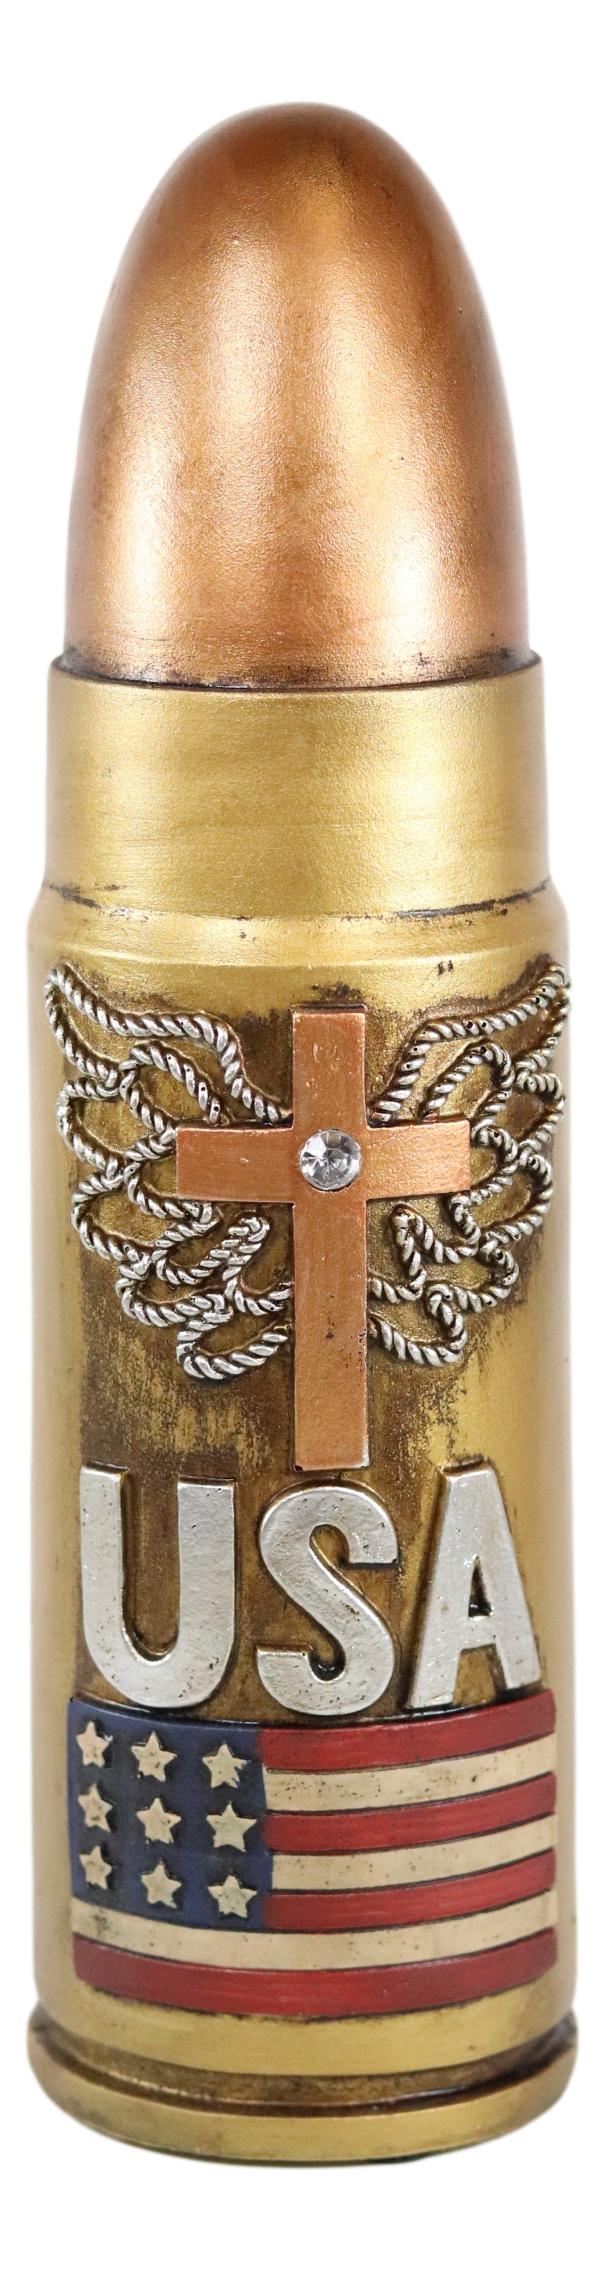 Western Rifle Bullet Casing Shell With USA Flag And Cross Money Coin Bank Decor